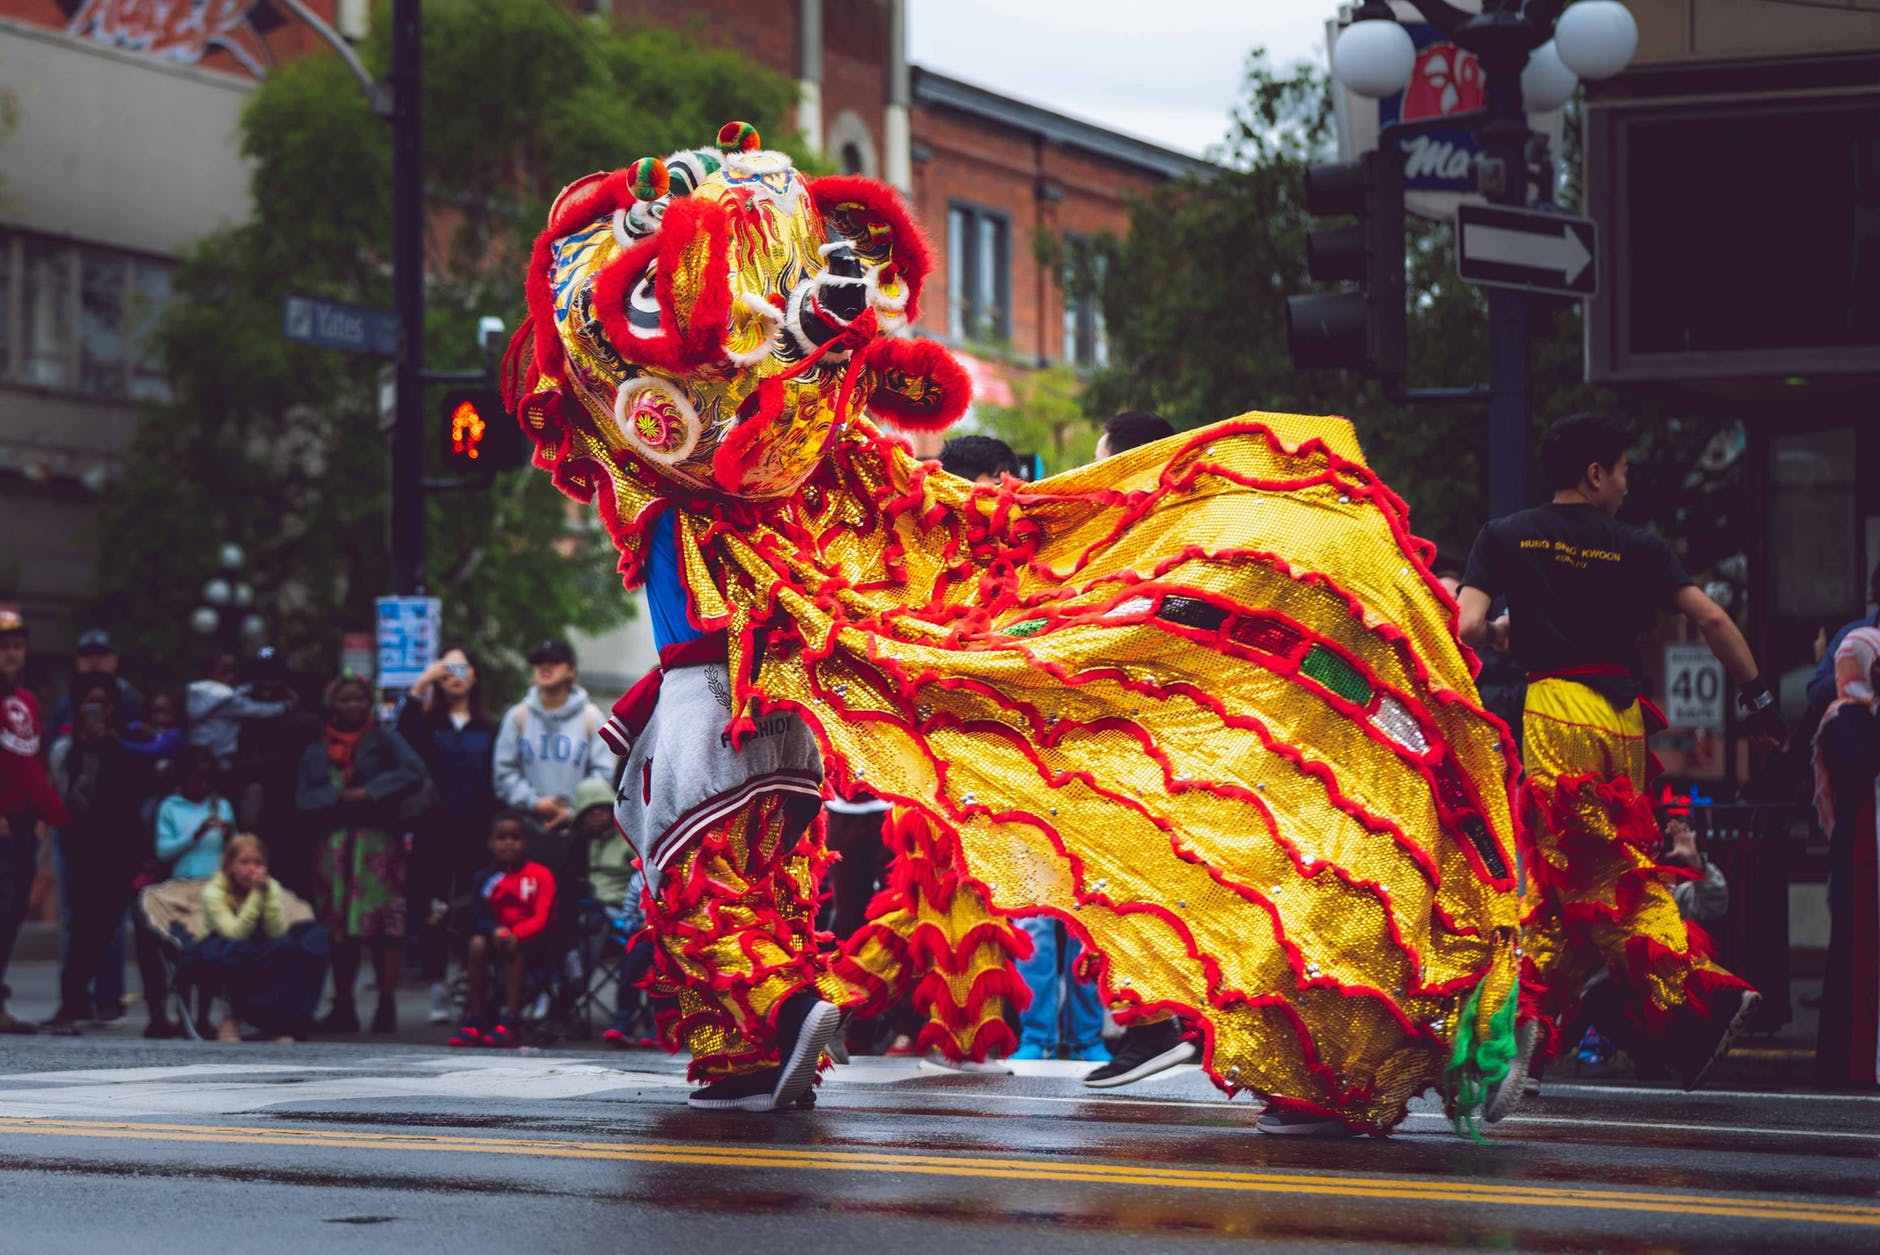 Celebrate Chinese New Year At These Oregon Events!